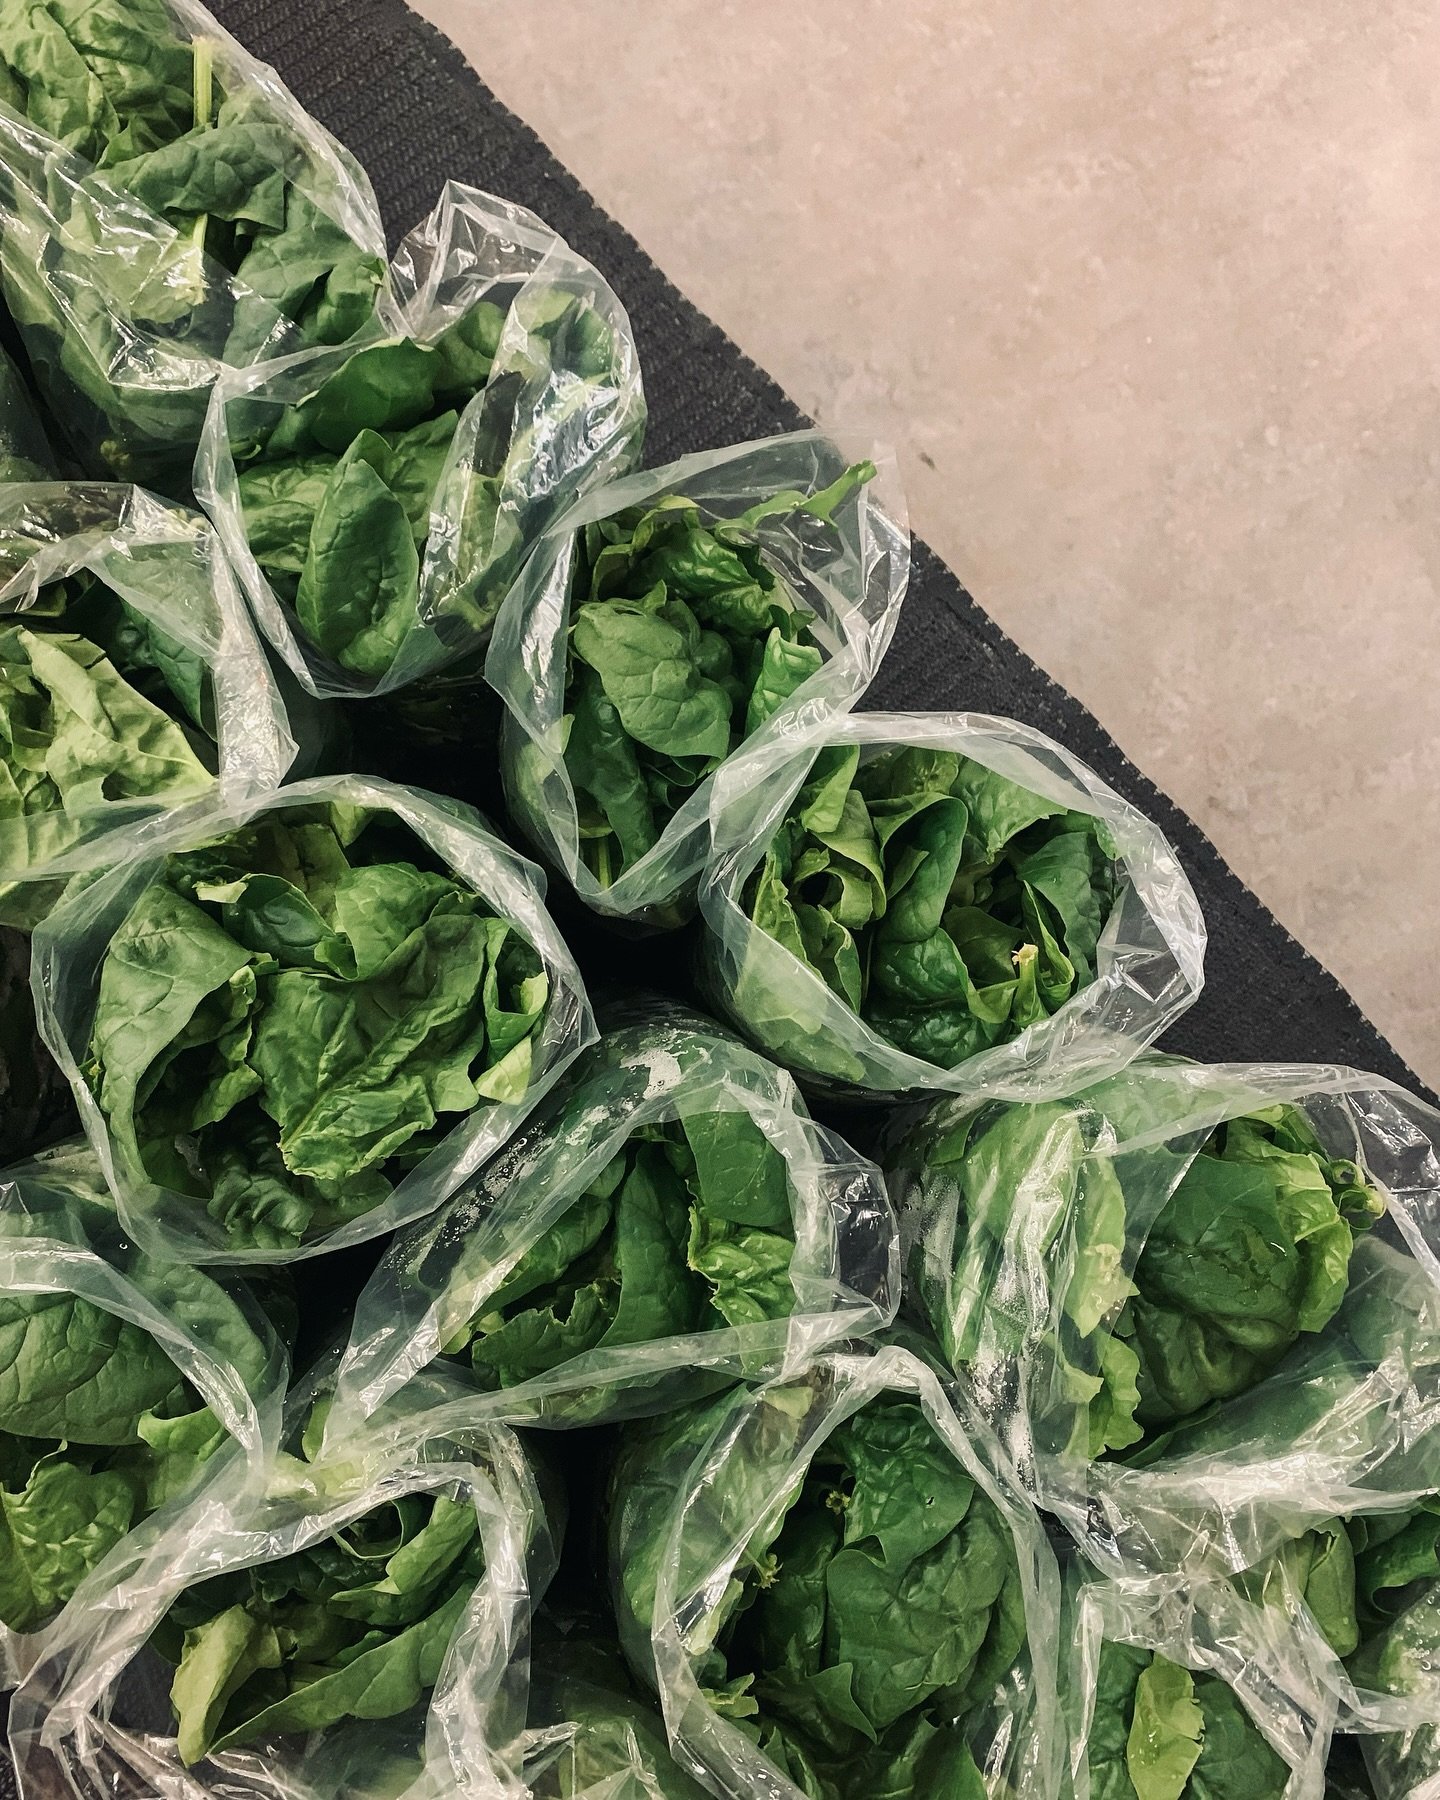 It&rsquo;s OPENING DAY at the @vernon_farmers_market and also our first day with fresh spinach! 🍃🍃🍃
See you between 8am-1pm on Thursdays at Kal Tire Place on 43rd Avenue.